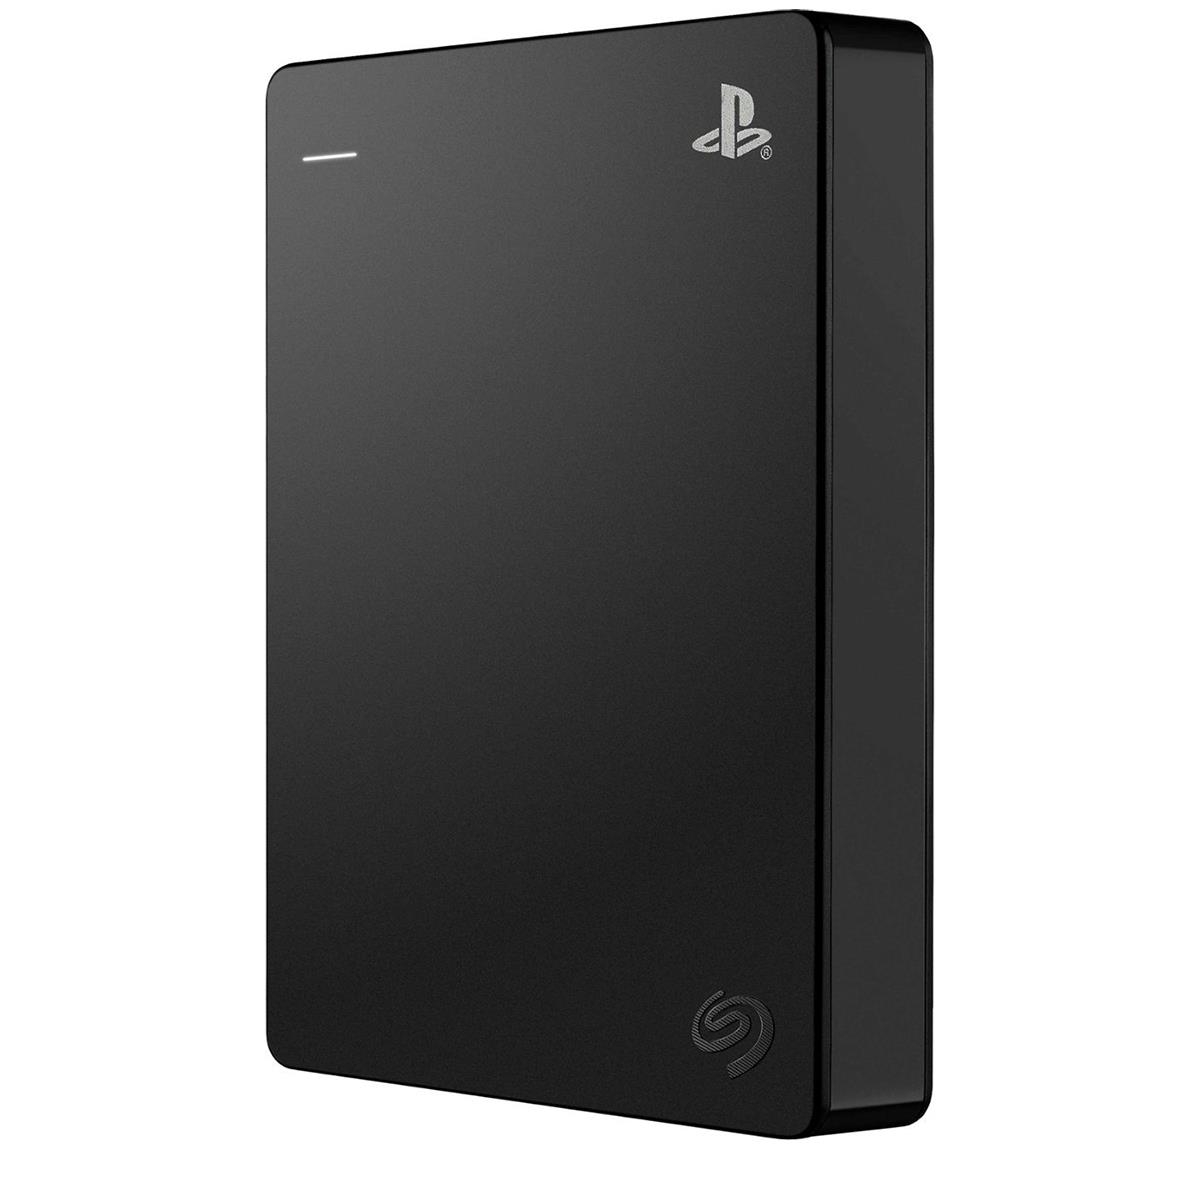 Image of Seagate Game Drive 4TB USB 3.2 Gen 1 External Hard Drive for PlayStation